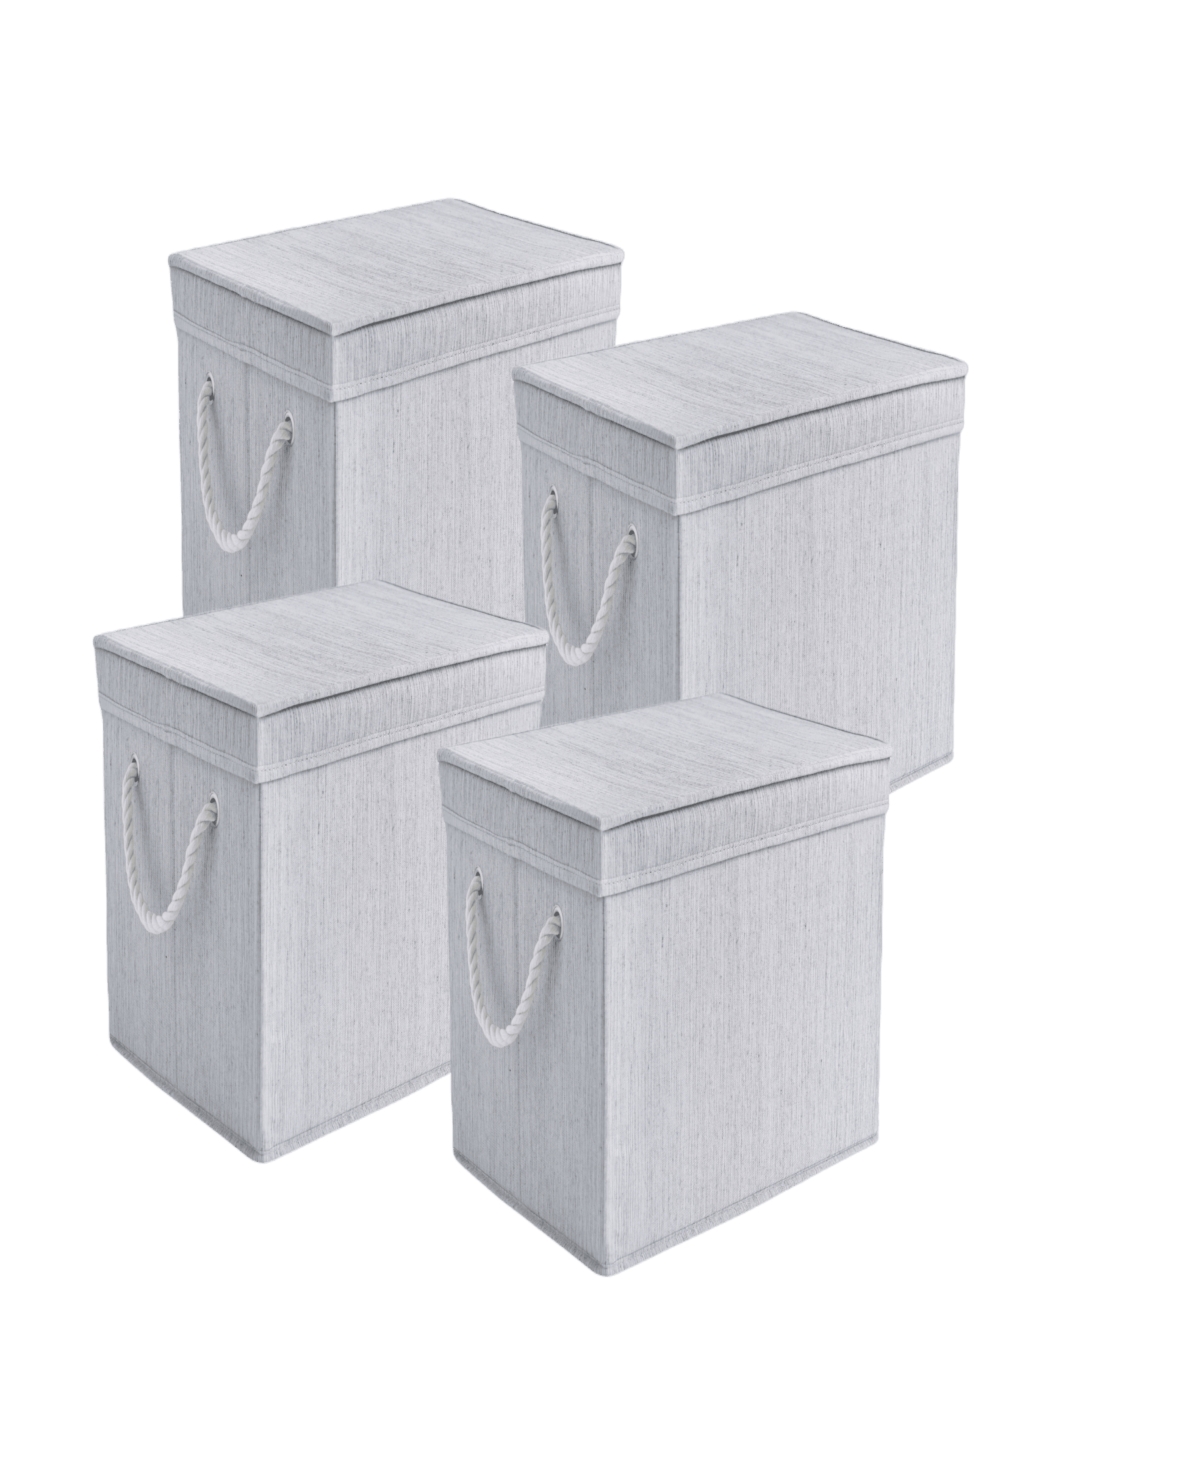 Wethinkstorage 34 Litre Collapsible Fabric Storage Bins With Lids And Cotton Rope Handles, Set Of 4 In Gray